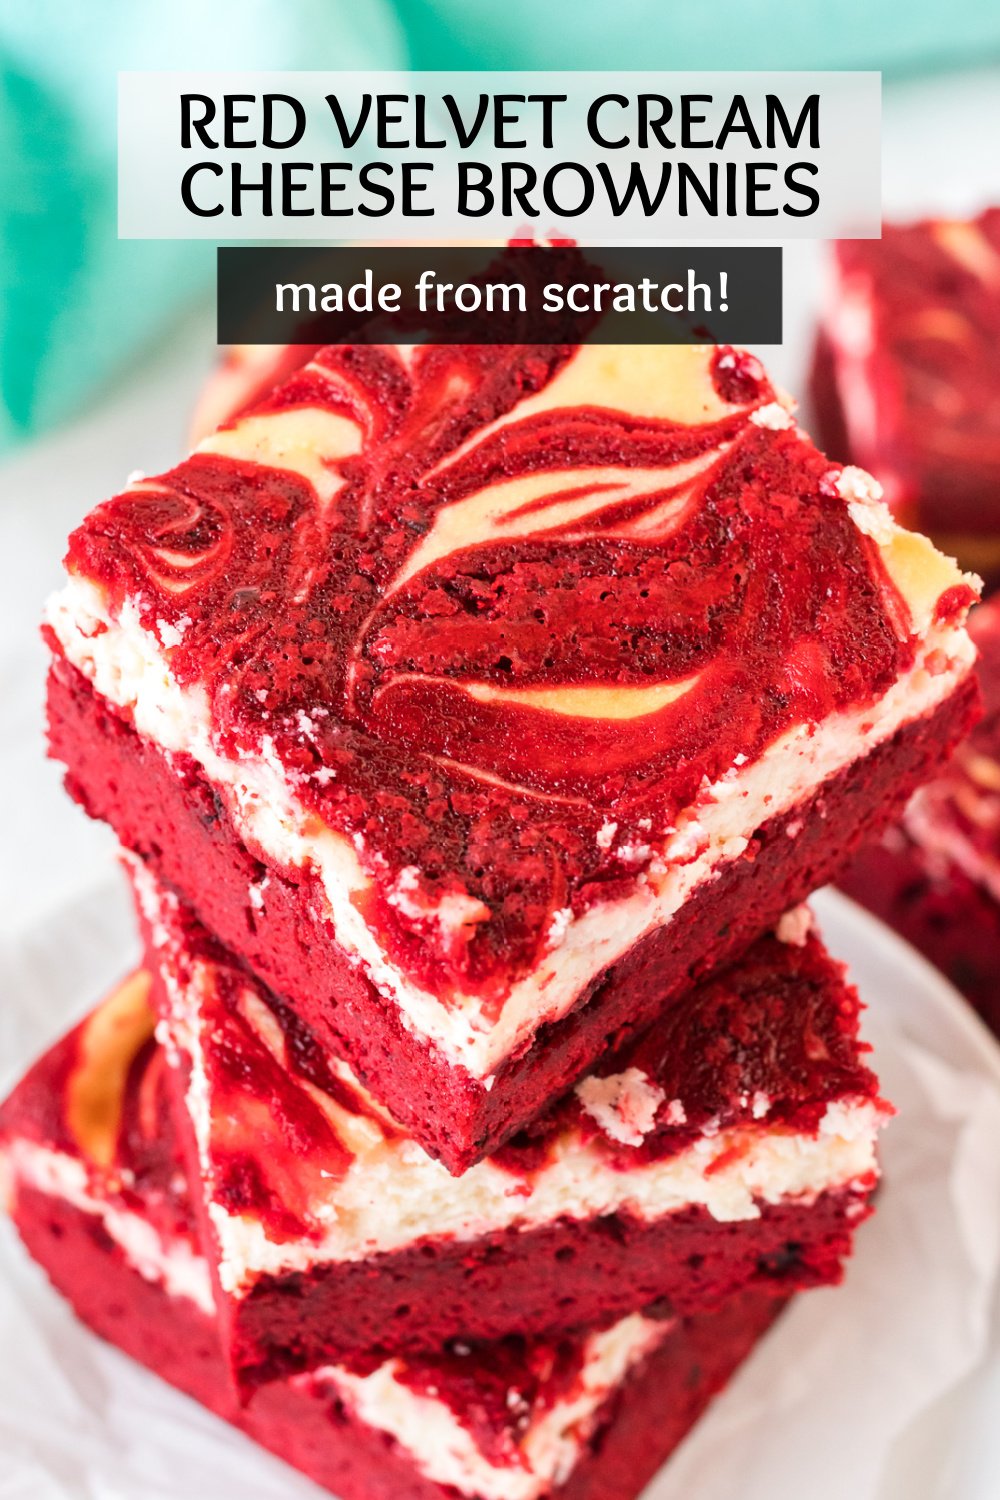 Red Velvet Cheesecake Swirl Brownies are made from scratch but so easy! A rich, red velvet brownie topped with a creamy cheesecake topping - swirled together for a dessert that is as pretty as it is delicious! | www.persnicketyplates.com